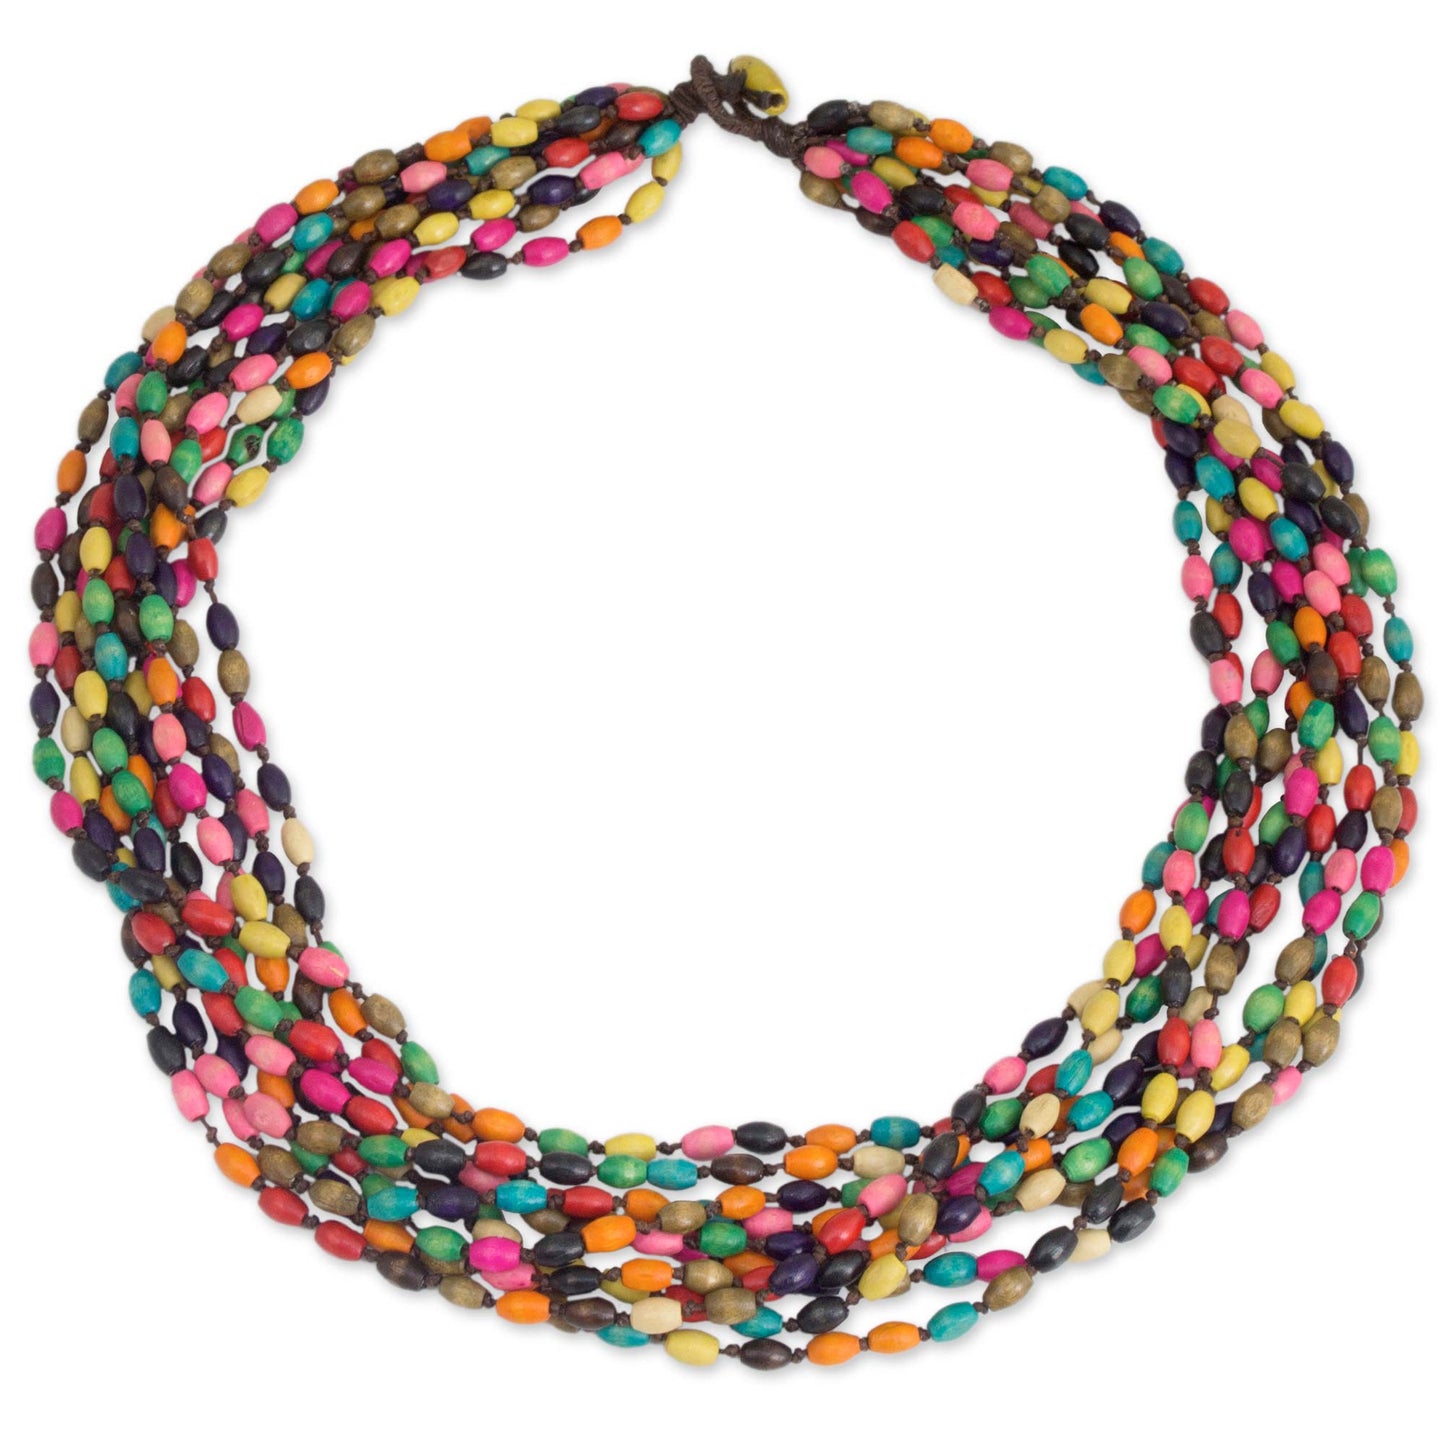 Songkran Belle Layered Necklace